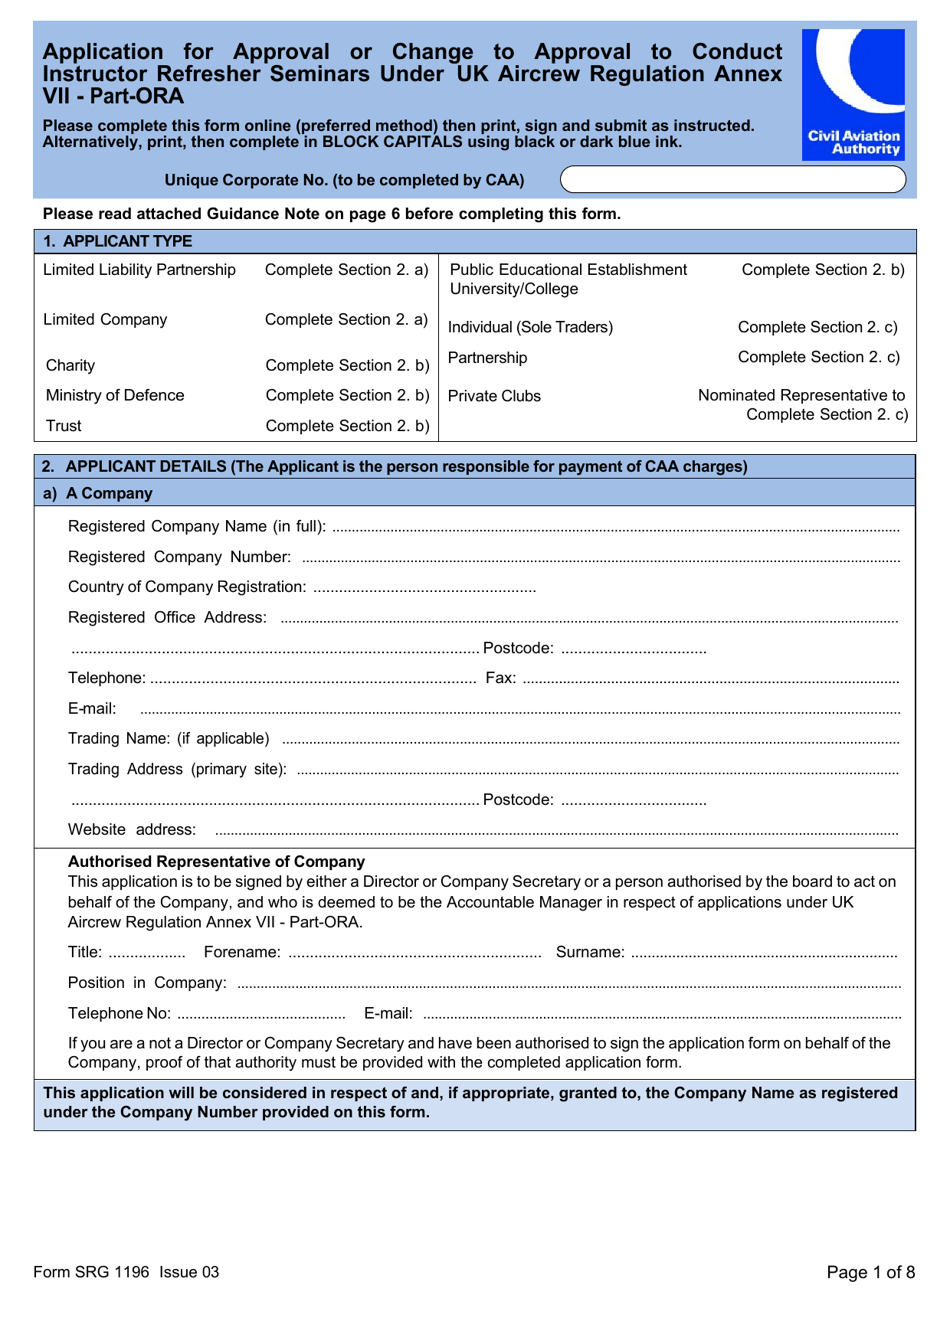 Form SRG1196 Application for Approval or Change to Approval to Conduct Instructor Refresher Seminars Under UK Aircrew Regulation Annex VII - Part-Ora - United Kingdom, Page 1